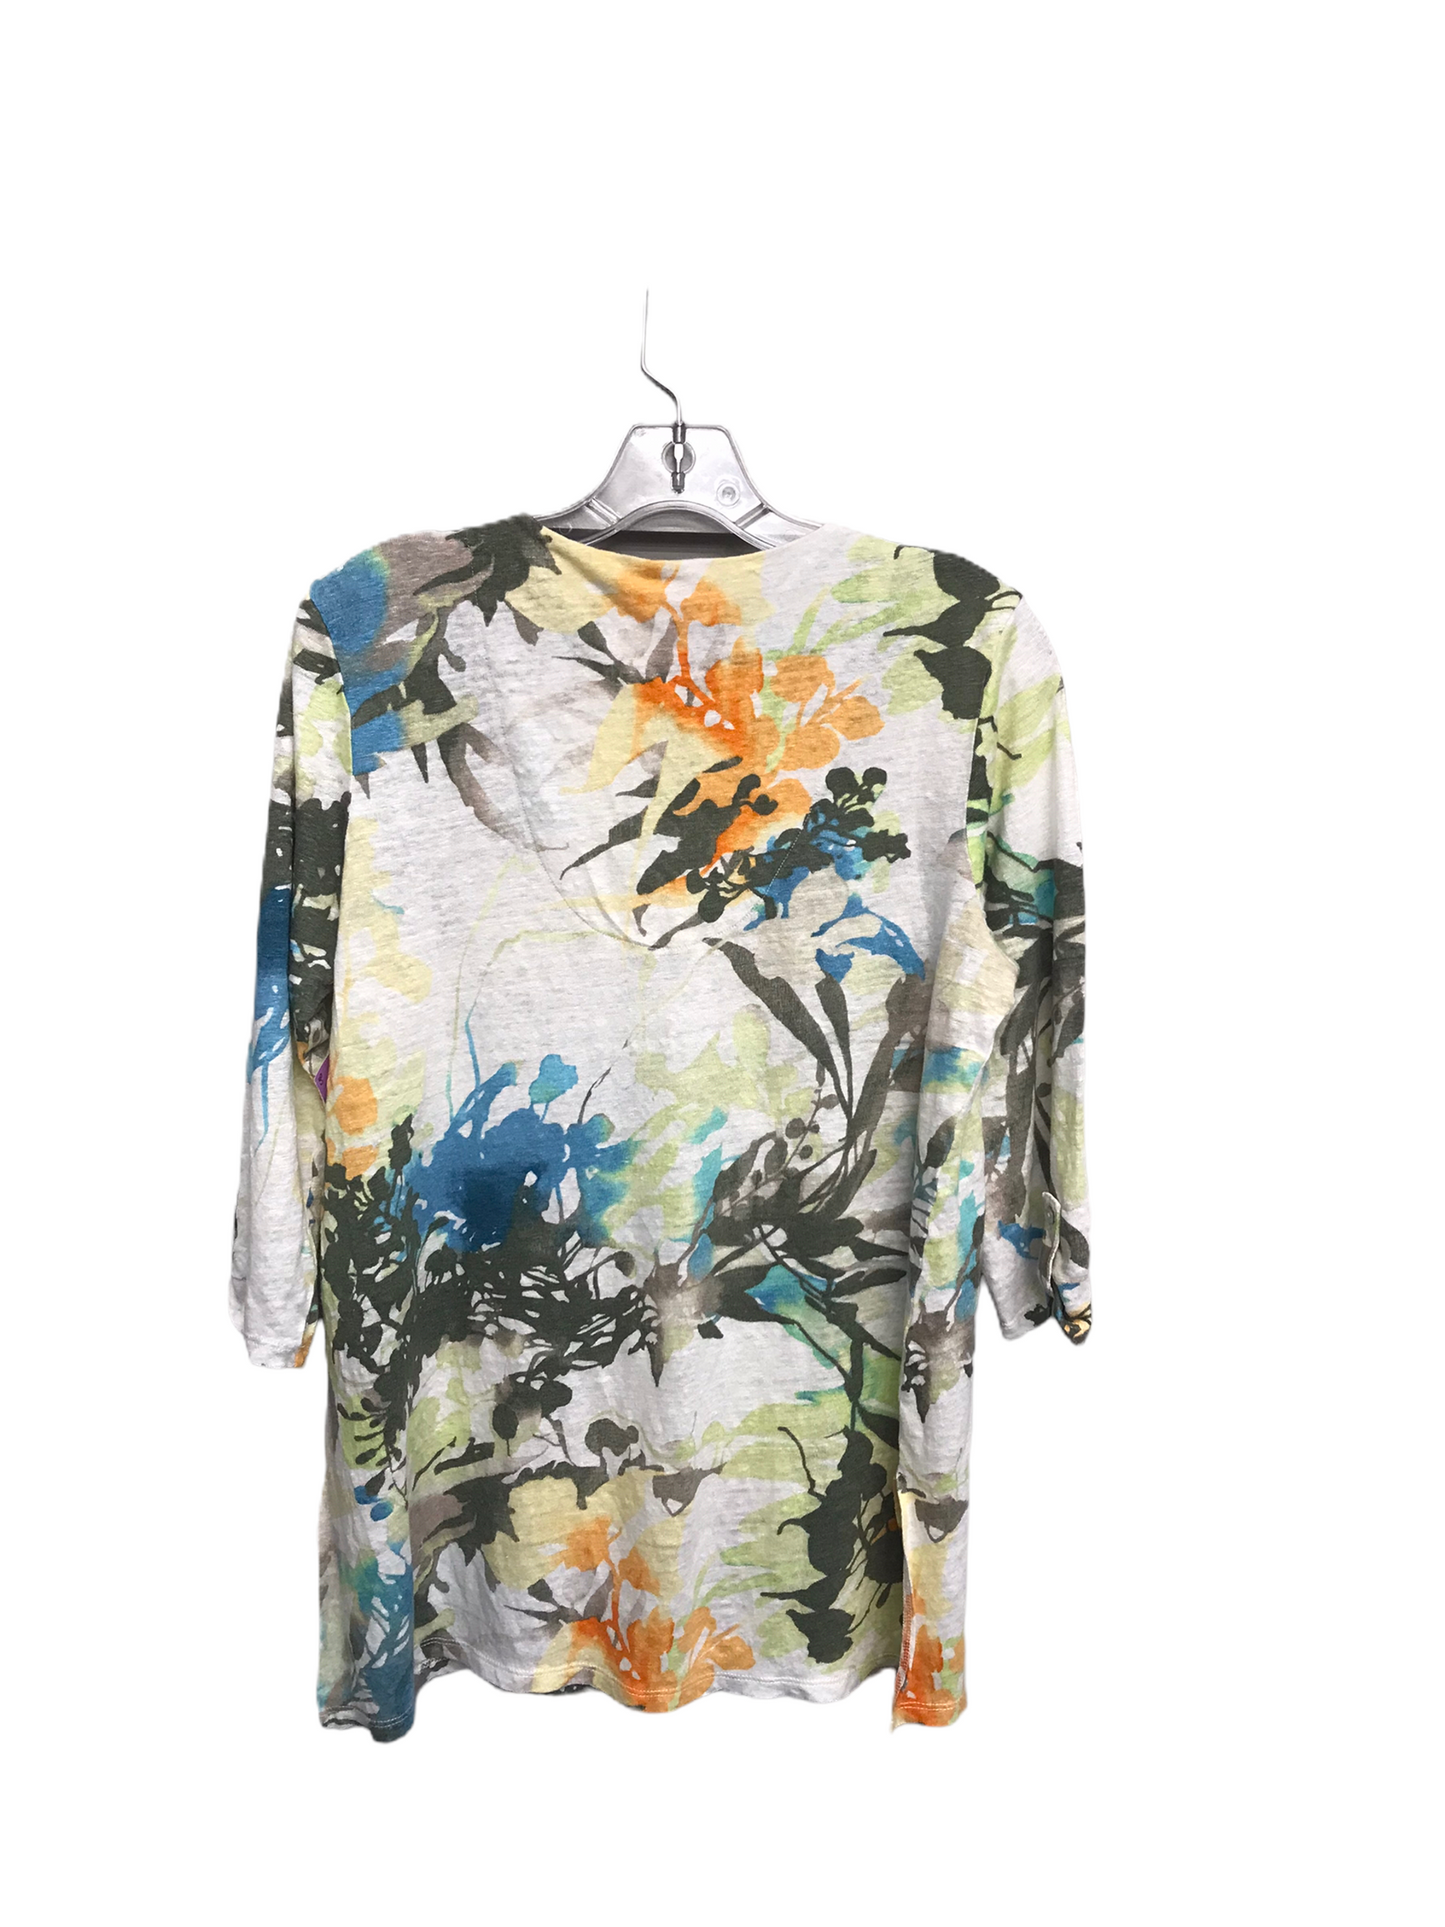 Floral Print Top Short Sleeve By Chicos, Size: M